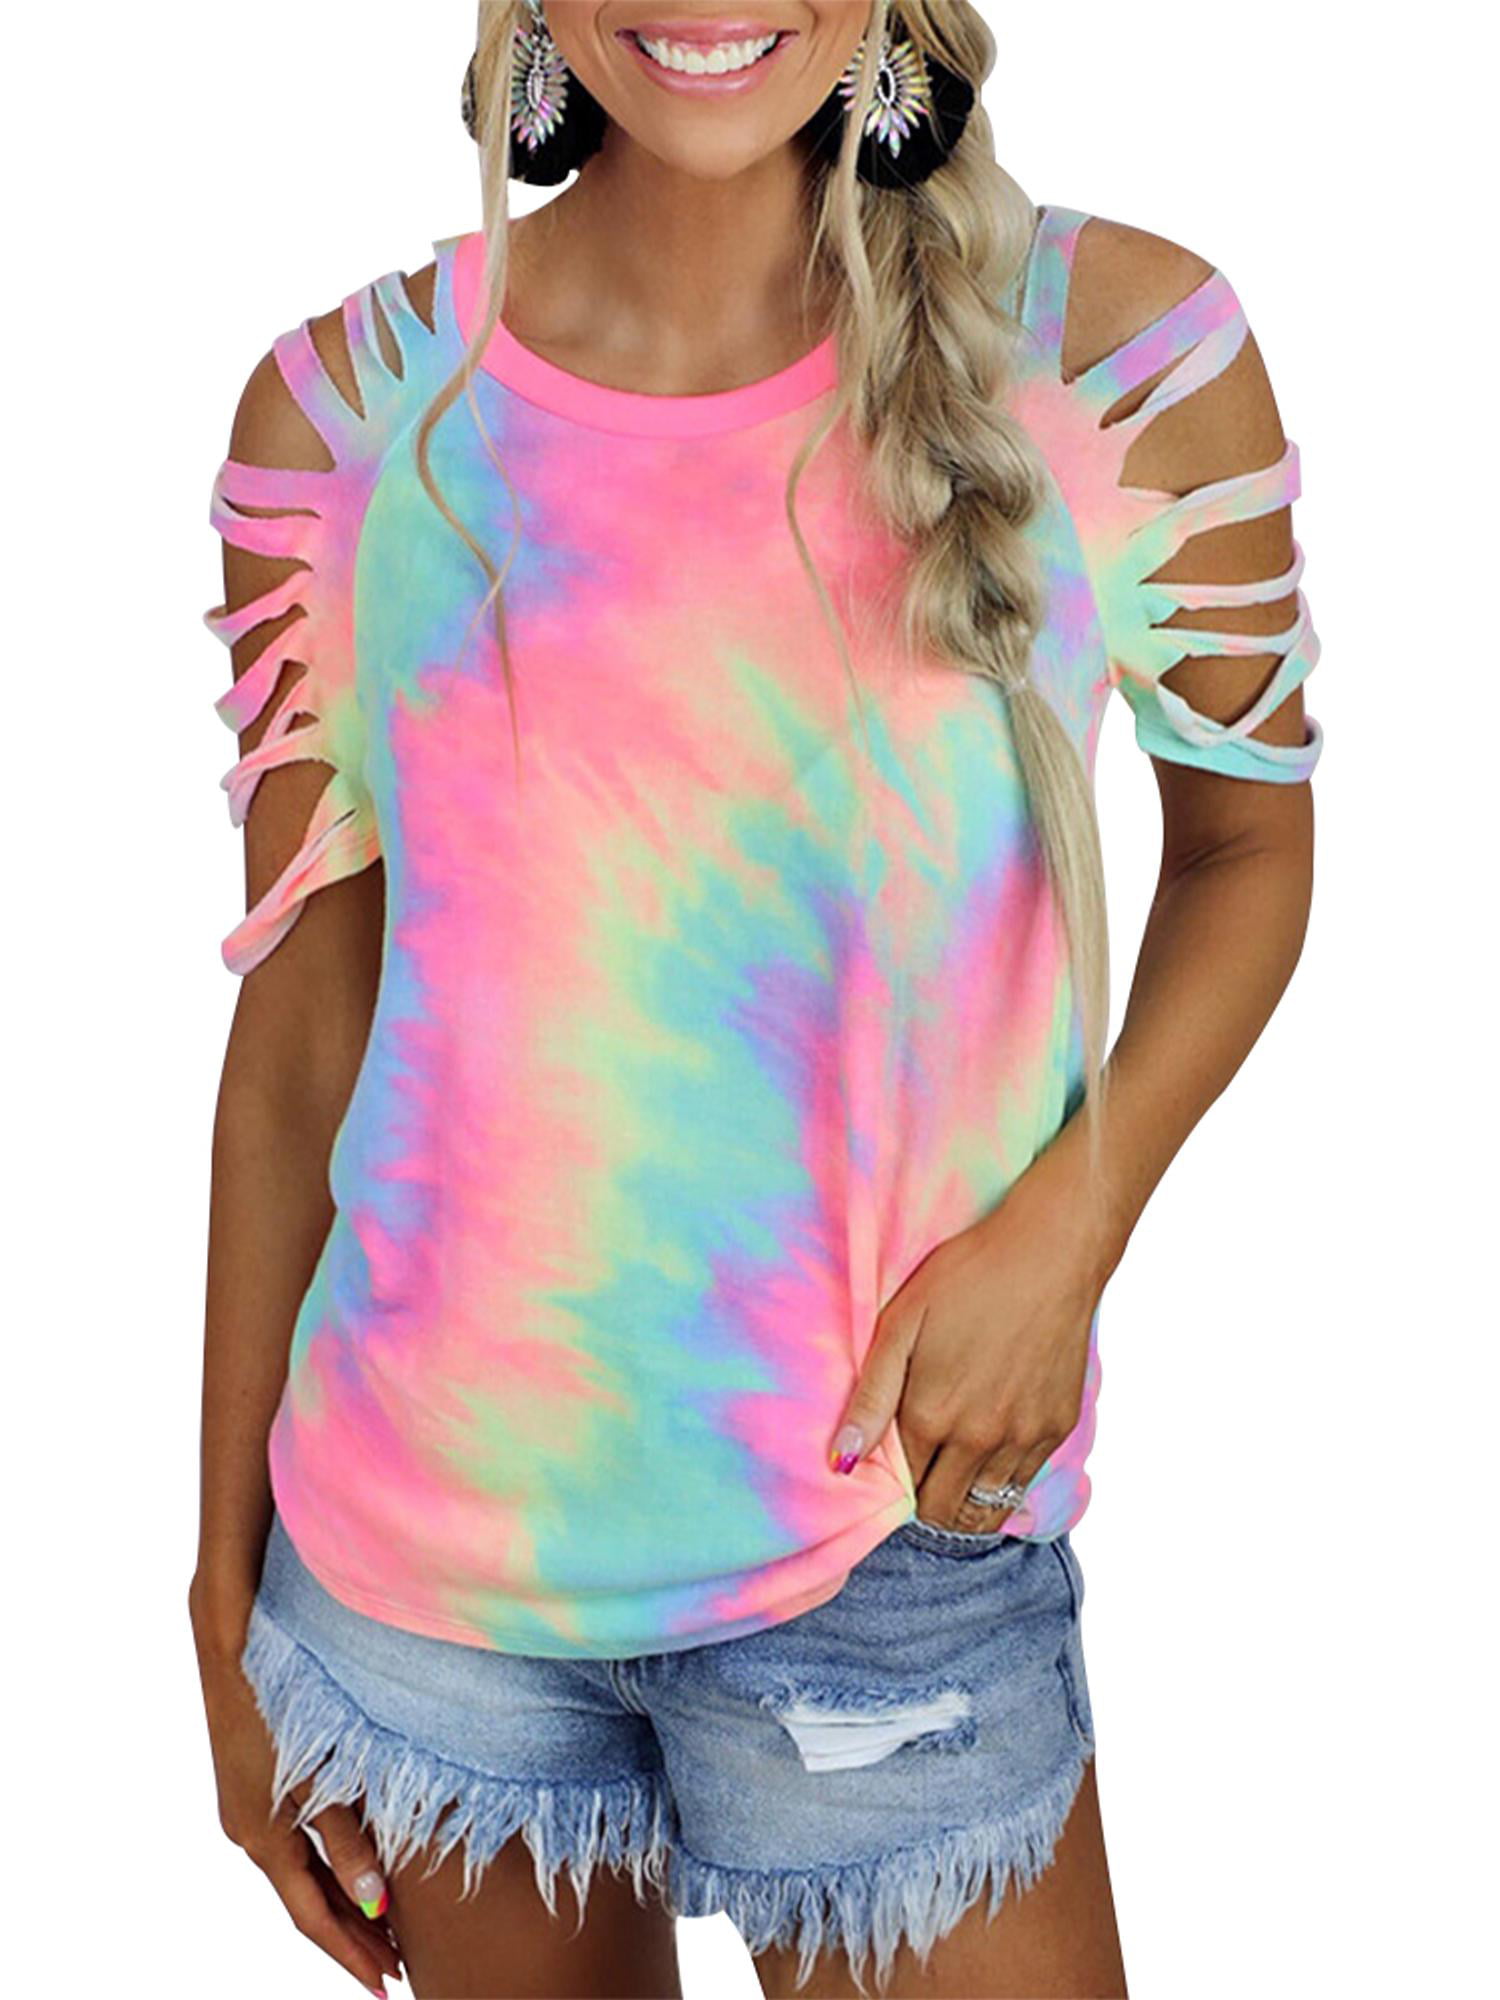 Summer Short Sleeve Cold Shoulder Tunic Tops Love You Letter Printing Tie Dye Shirt Moms Gift Hollow Out Tops 